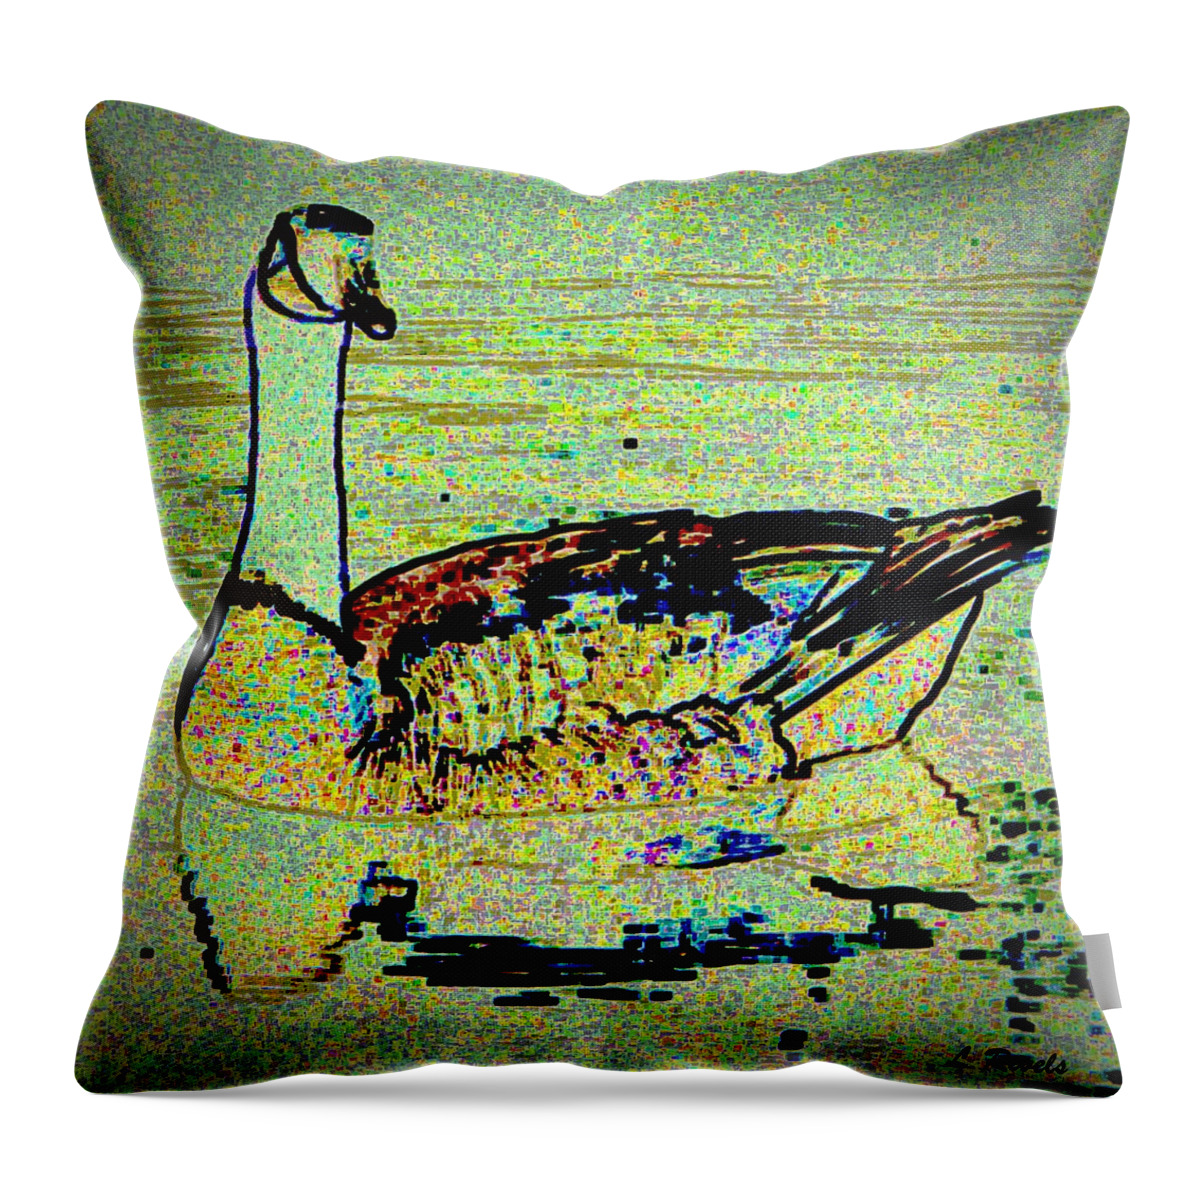 Goose Throw Pillow featuring the photograph Take A Gander by Leslie Revels